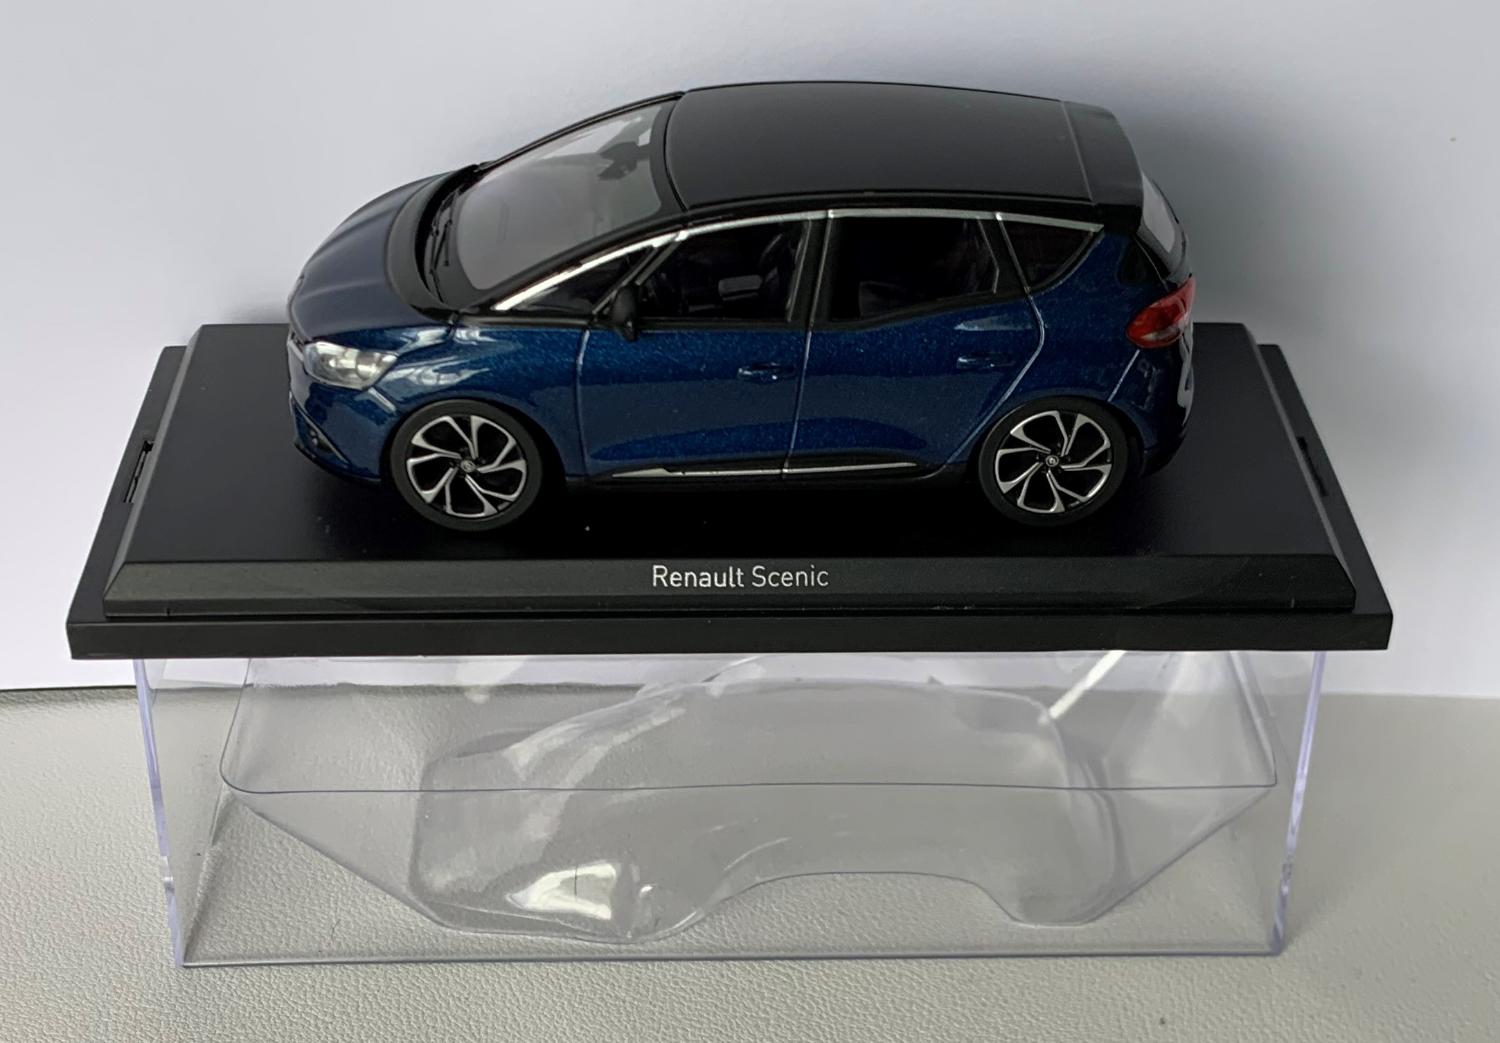 Renault Scenic 2016 in cosmos blue / black 1:43 scale model from Norev